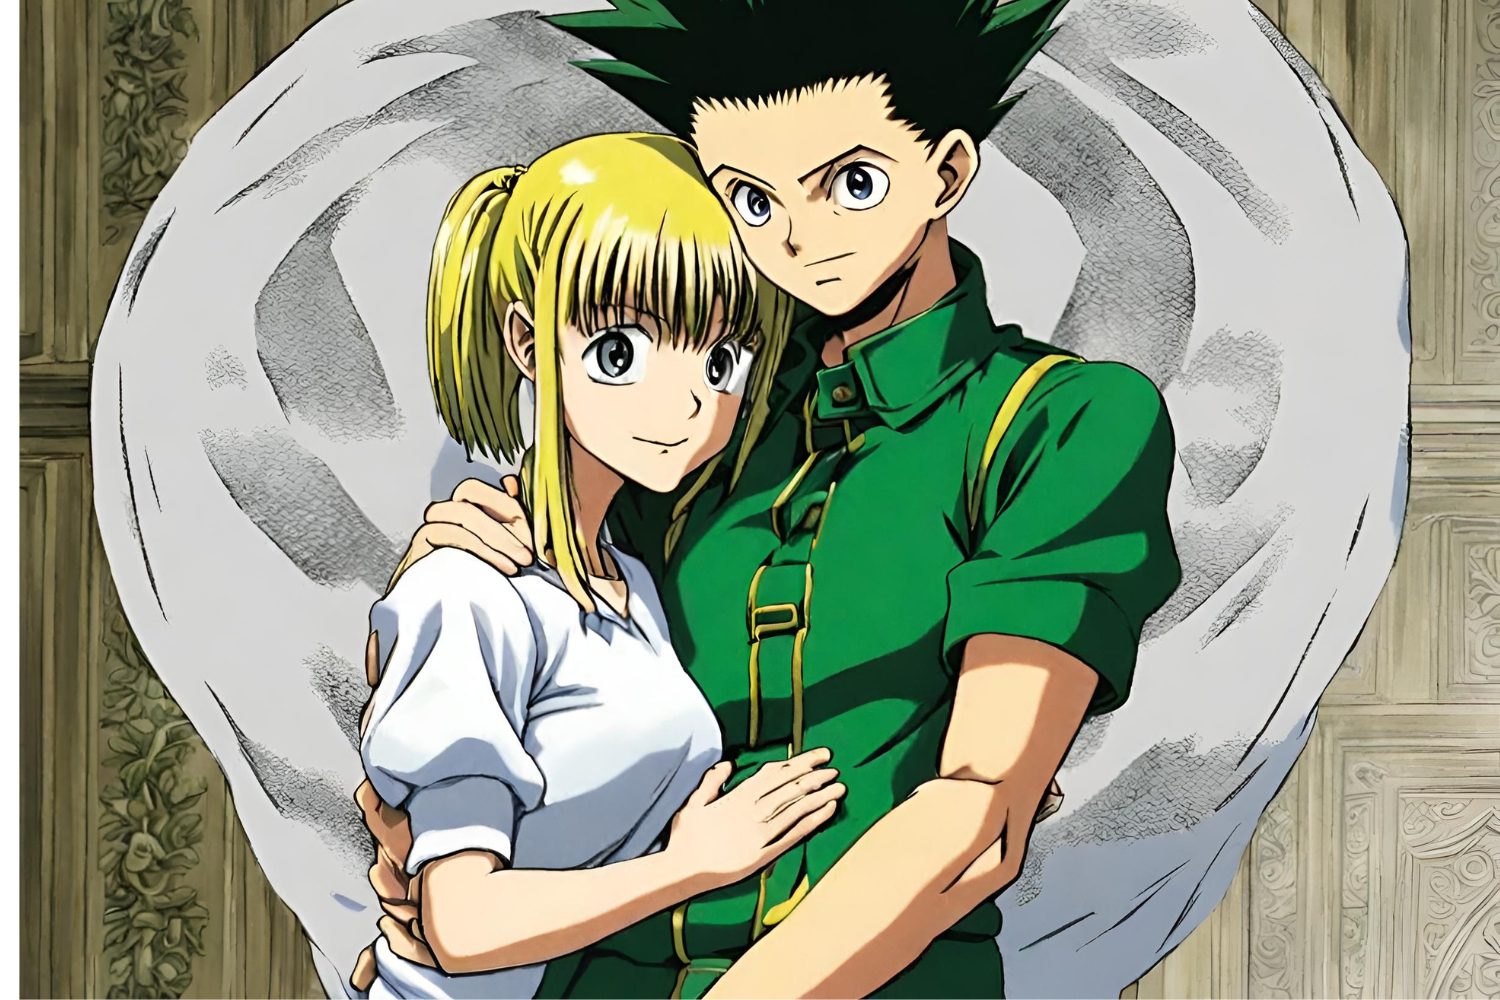 Hunter x Hunter: Who is Gon’s wife?